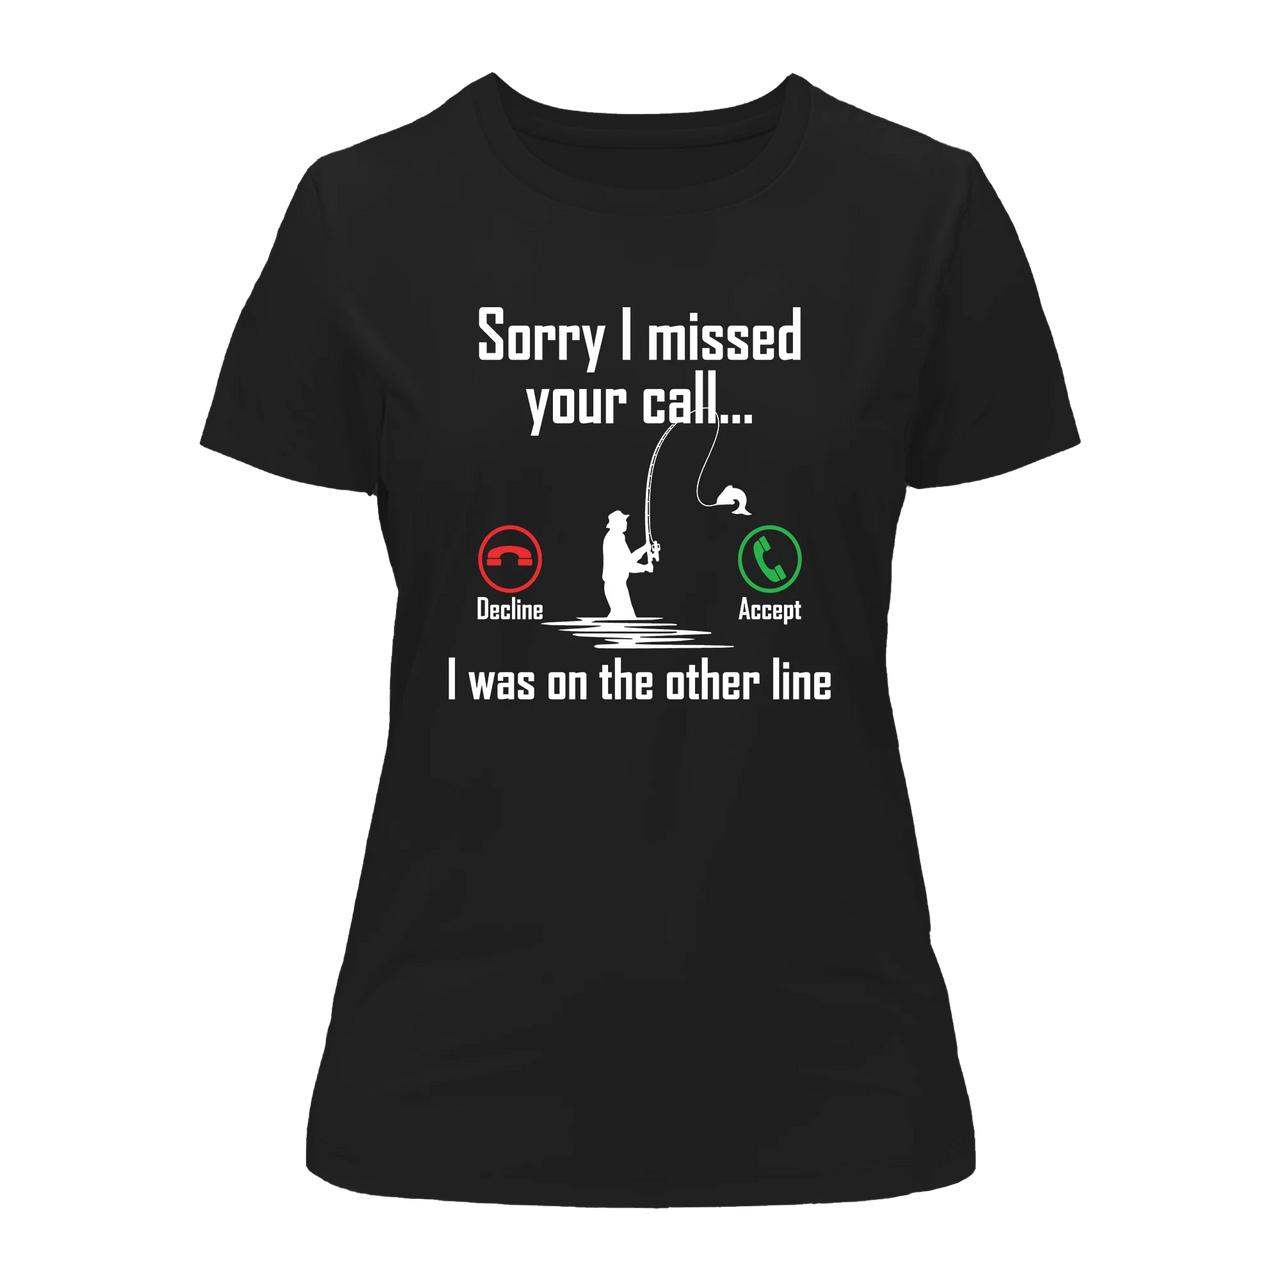 I Was On Another Line v2 T-Shirt for Women